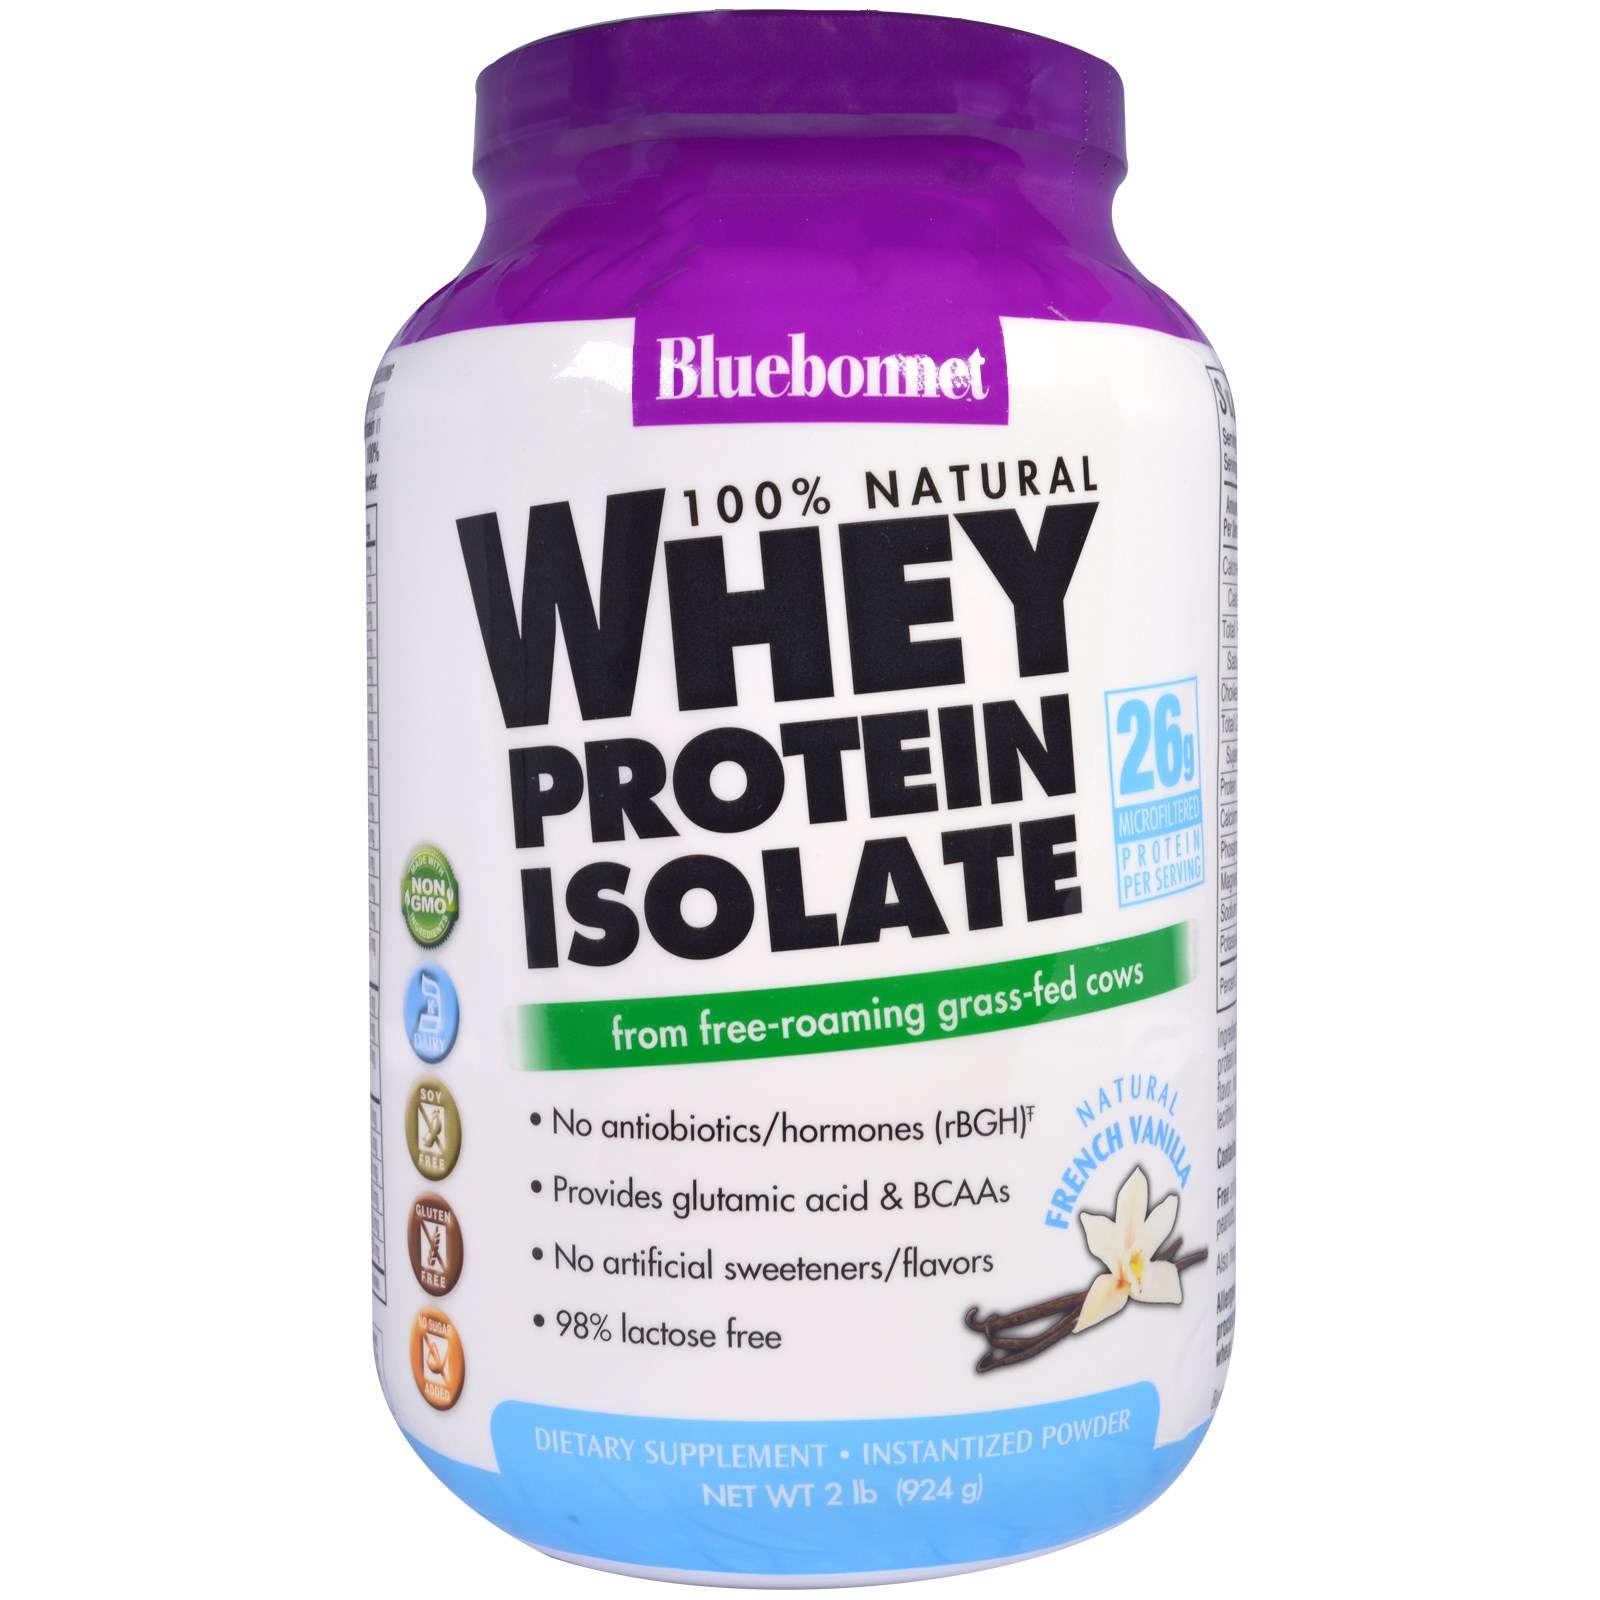 Whey Protein Isolate Bluebonnet Nutrition